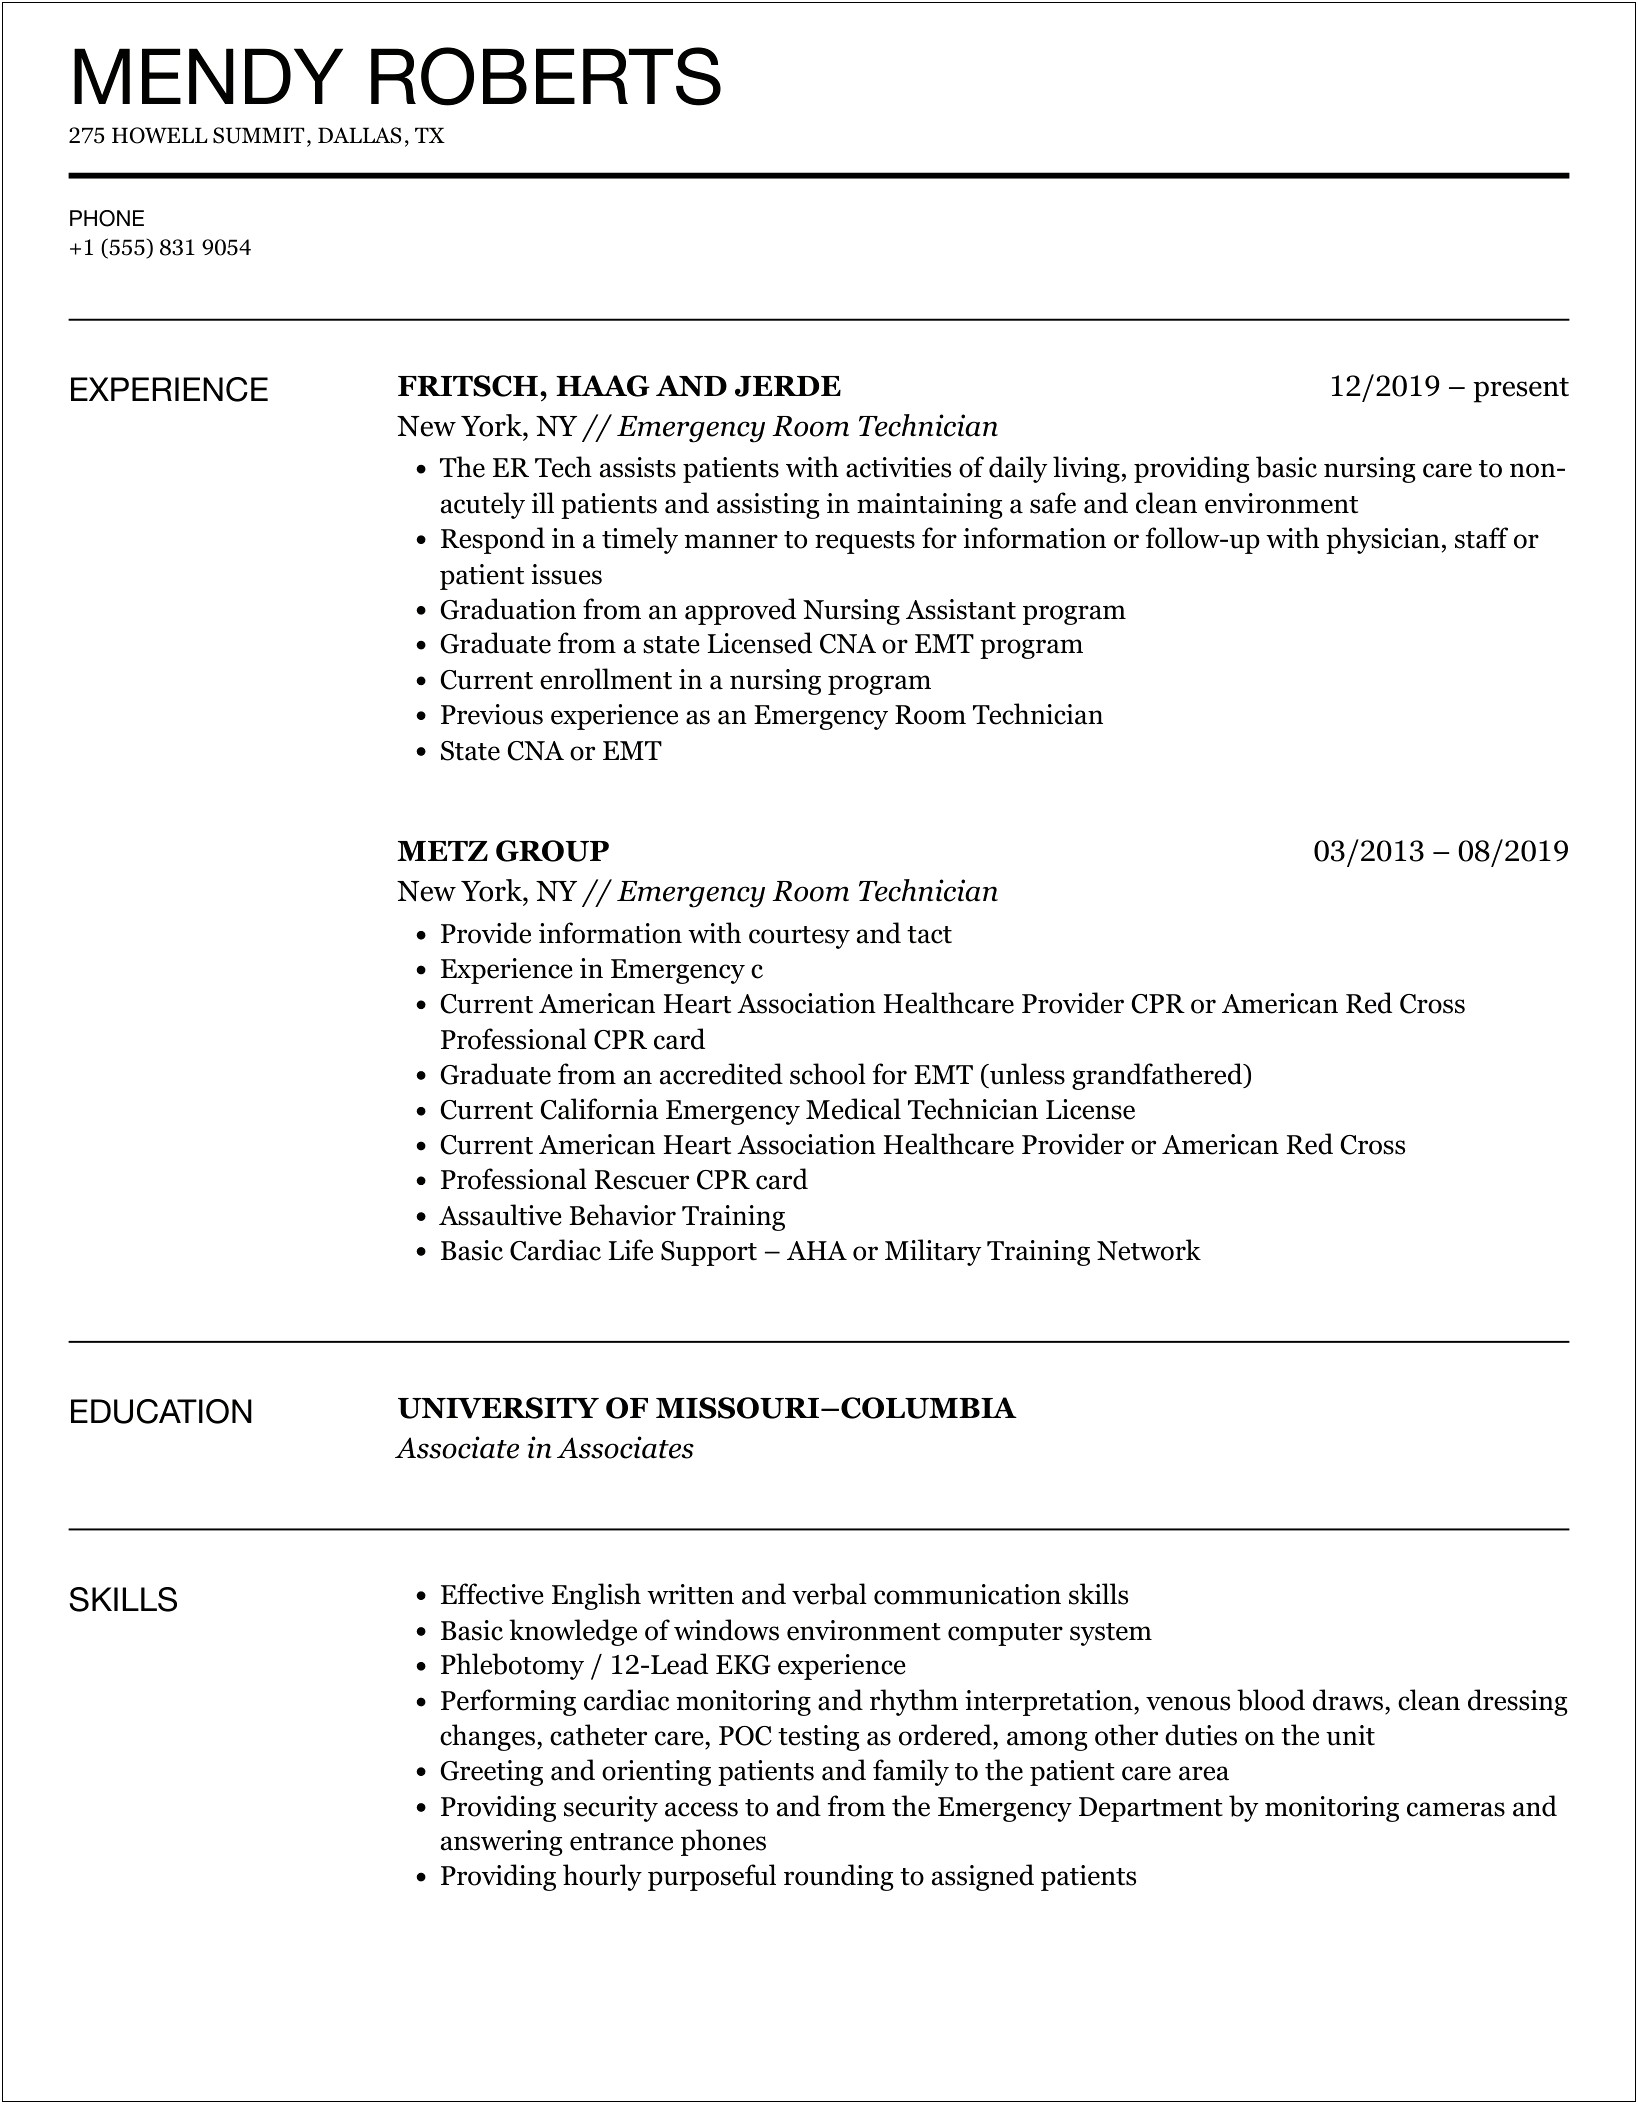 Example For Comments For Emergency Technician Resume